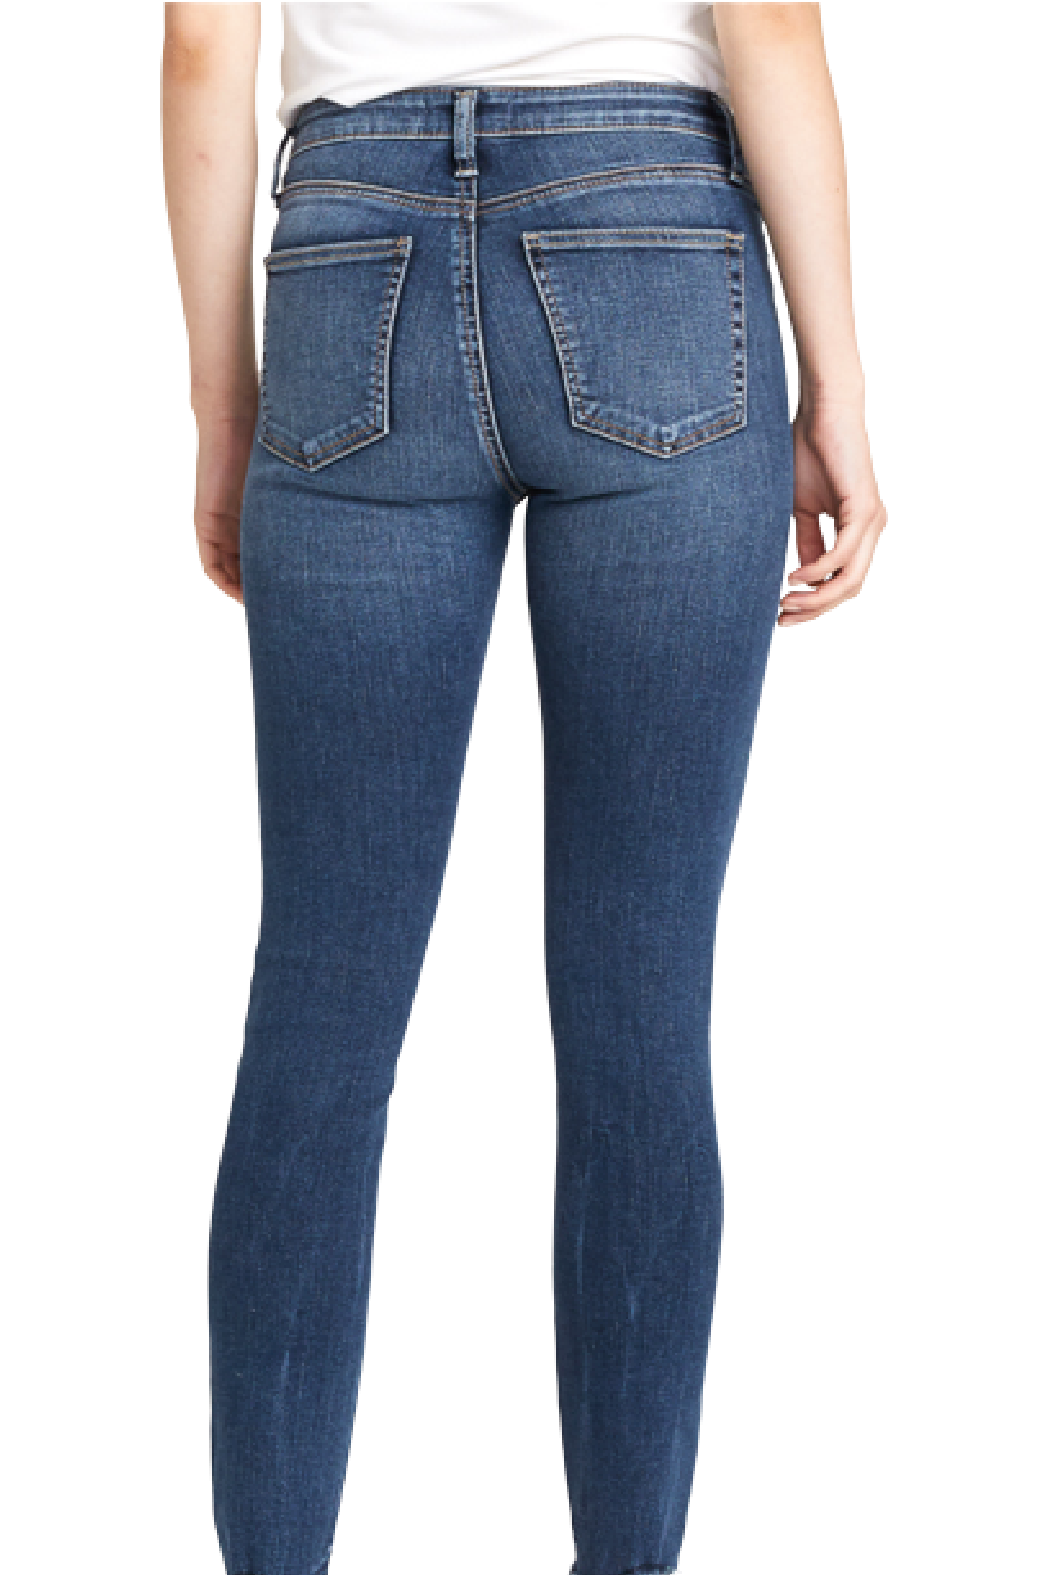 Silver Jeans Most Wanted Jean